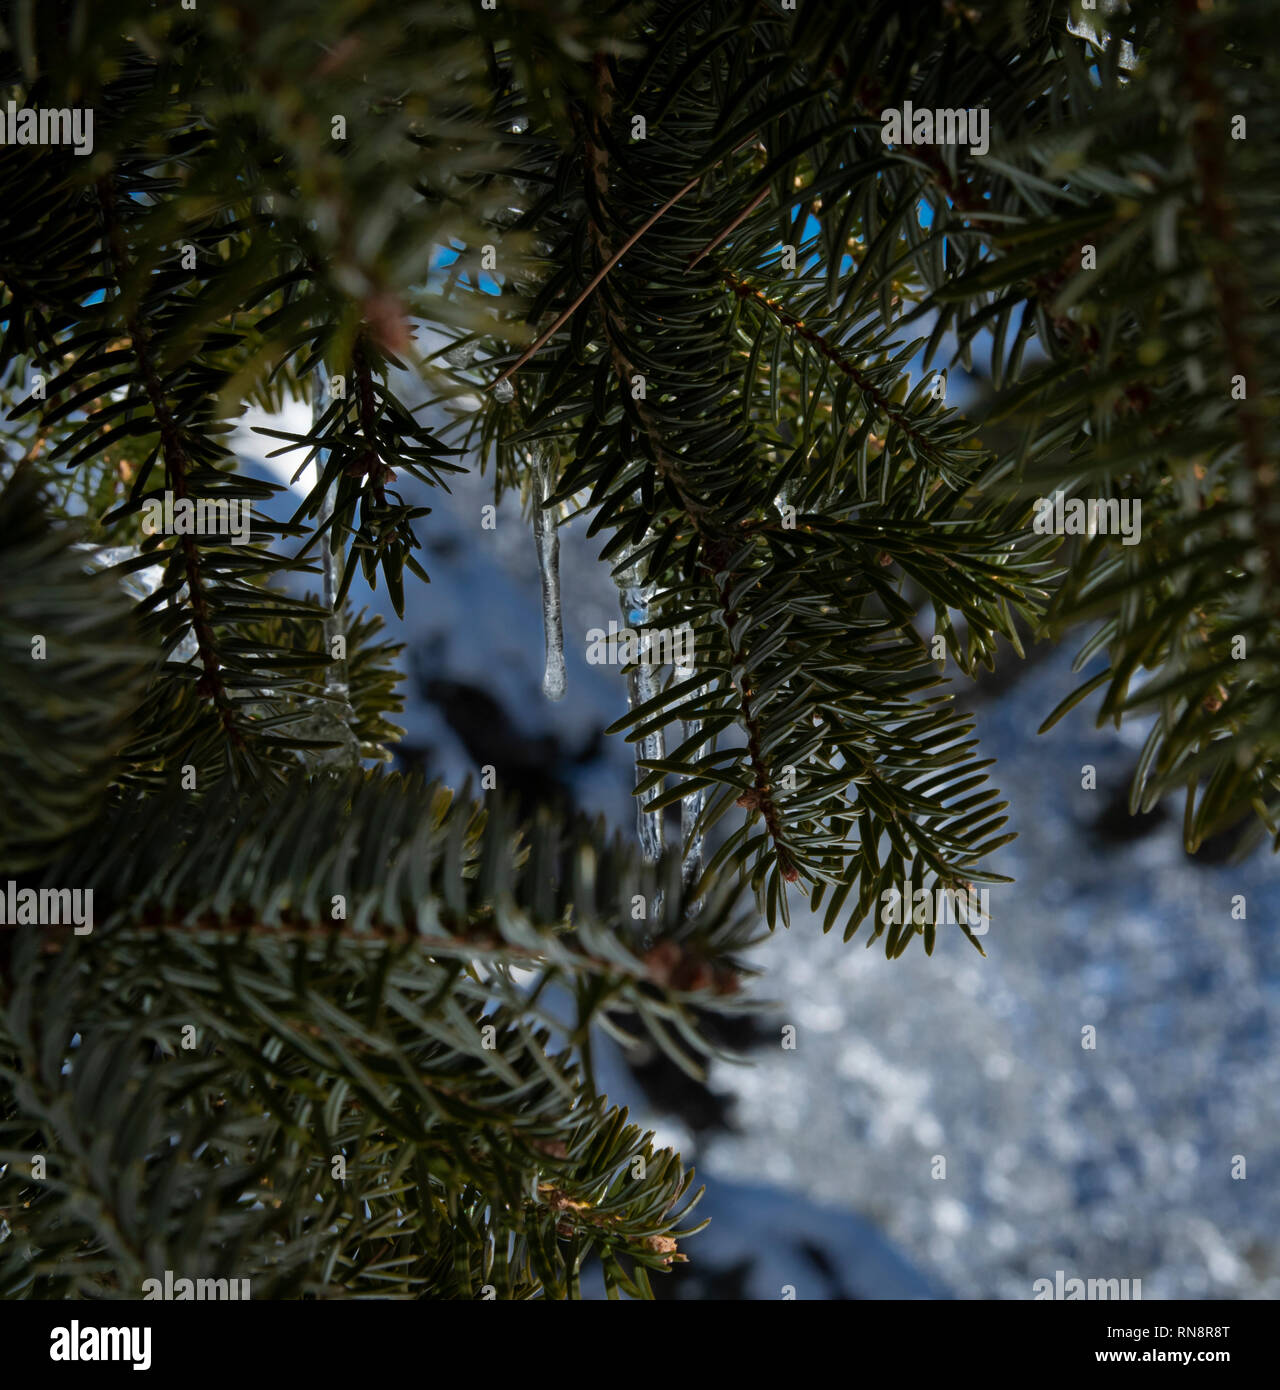 Frozen rain drop close-up hanging from a fir branch. Snow in the background out of focus Stock Photo